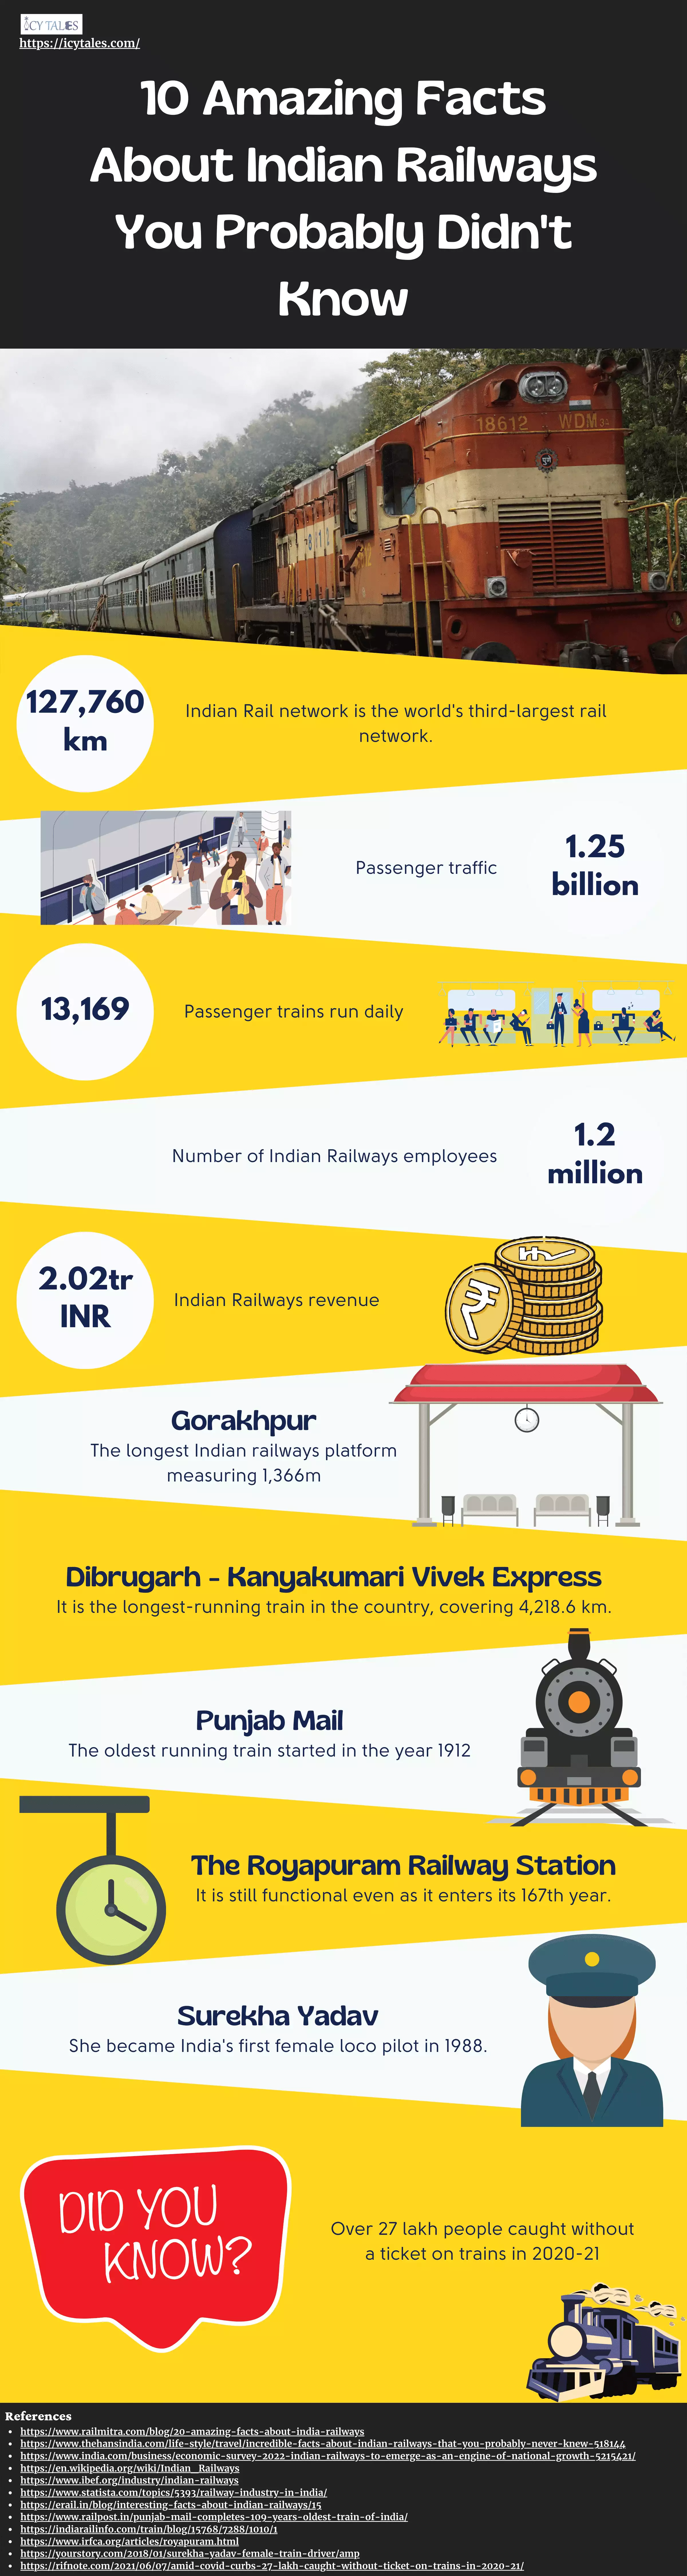 10 Amazing Facts About Indian Railways You Probably Didn't Know